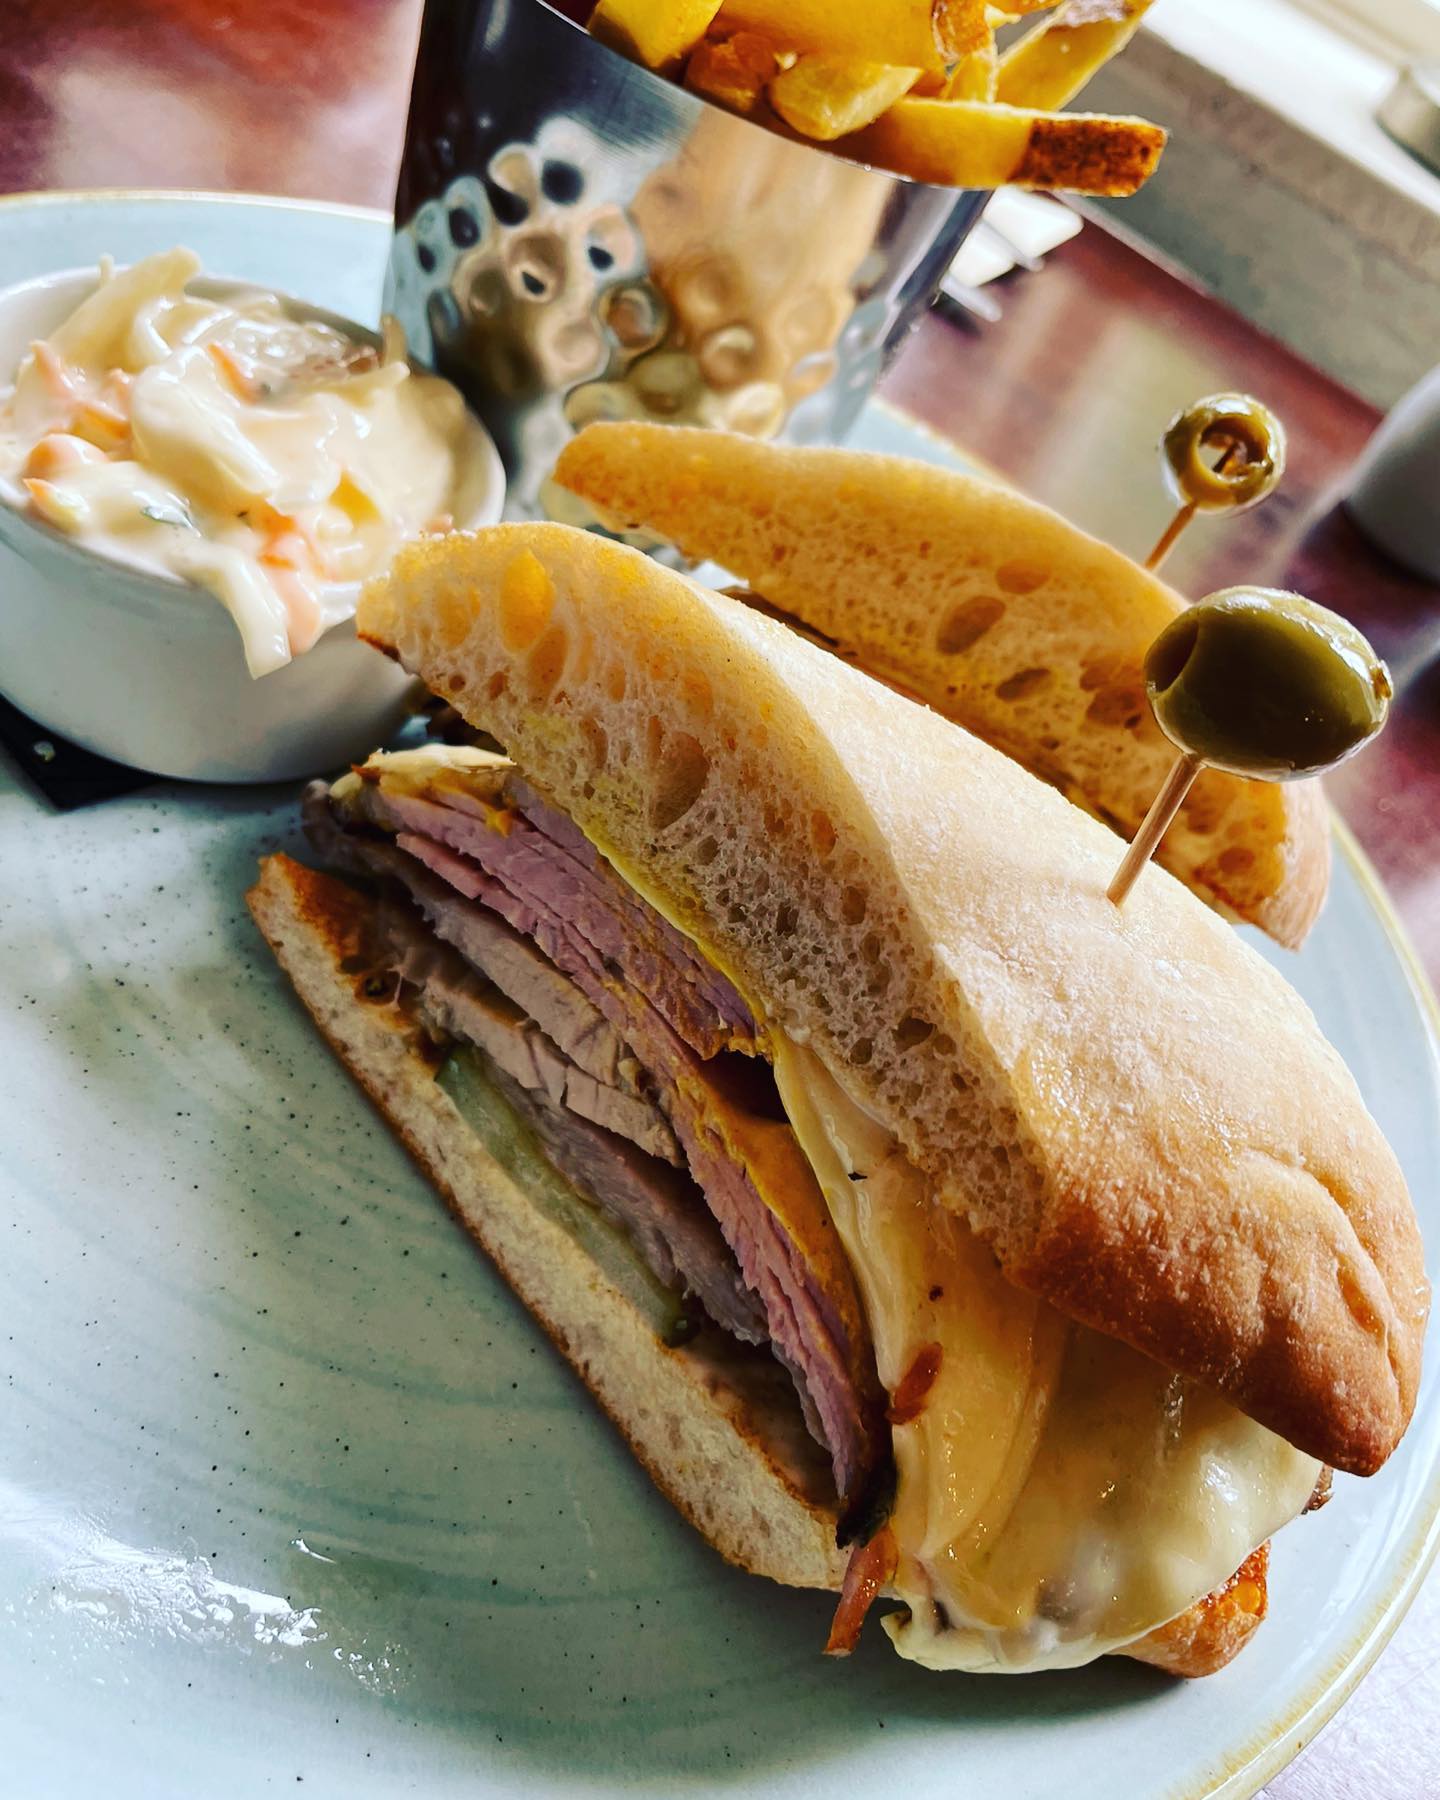 Cuban style toasted sandwich, roasted pork shoulder, honey glazed ham, thick cut pickles, Swiss cheese & American mustard on a toasted ciabatta